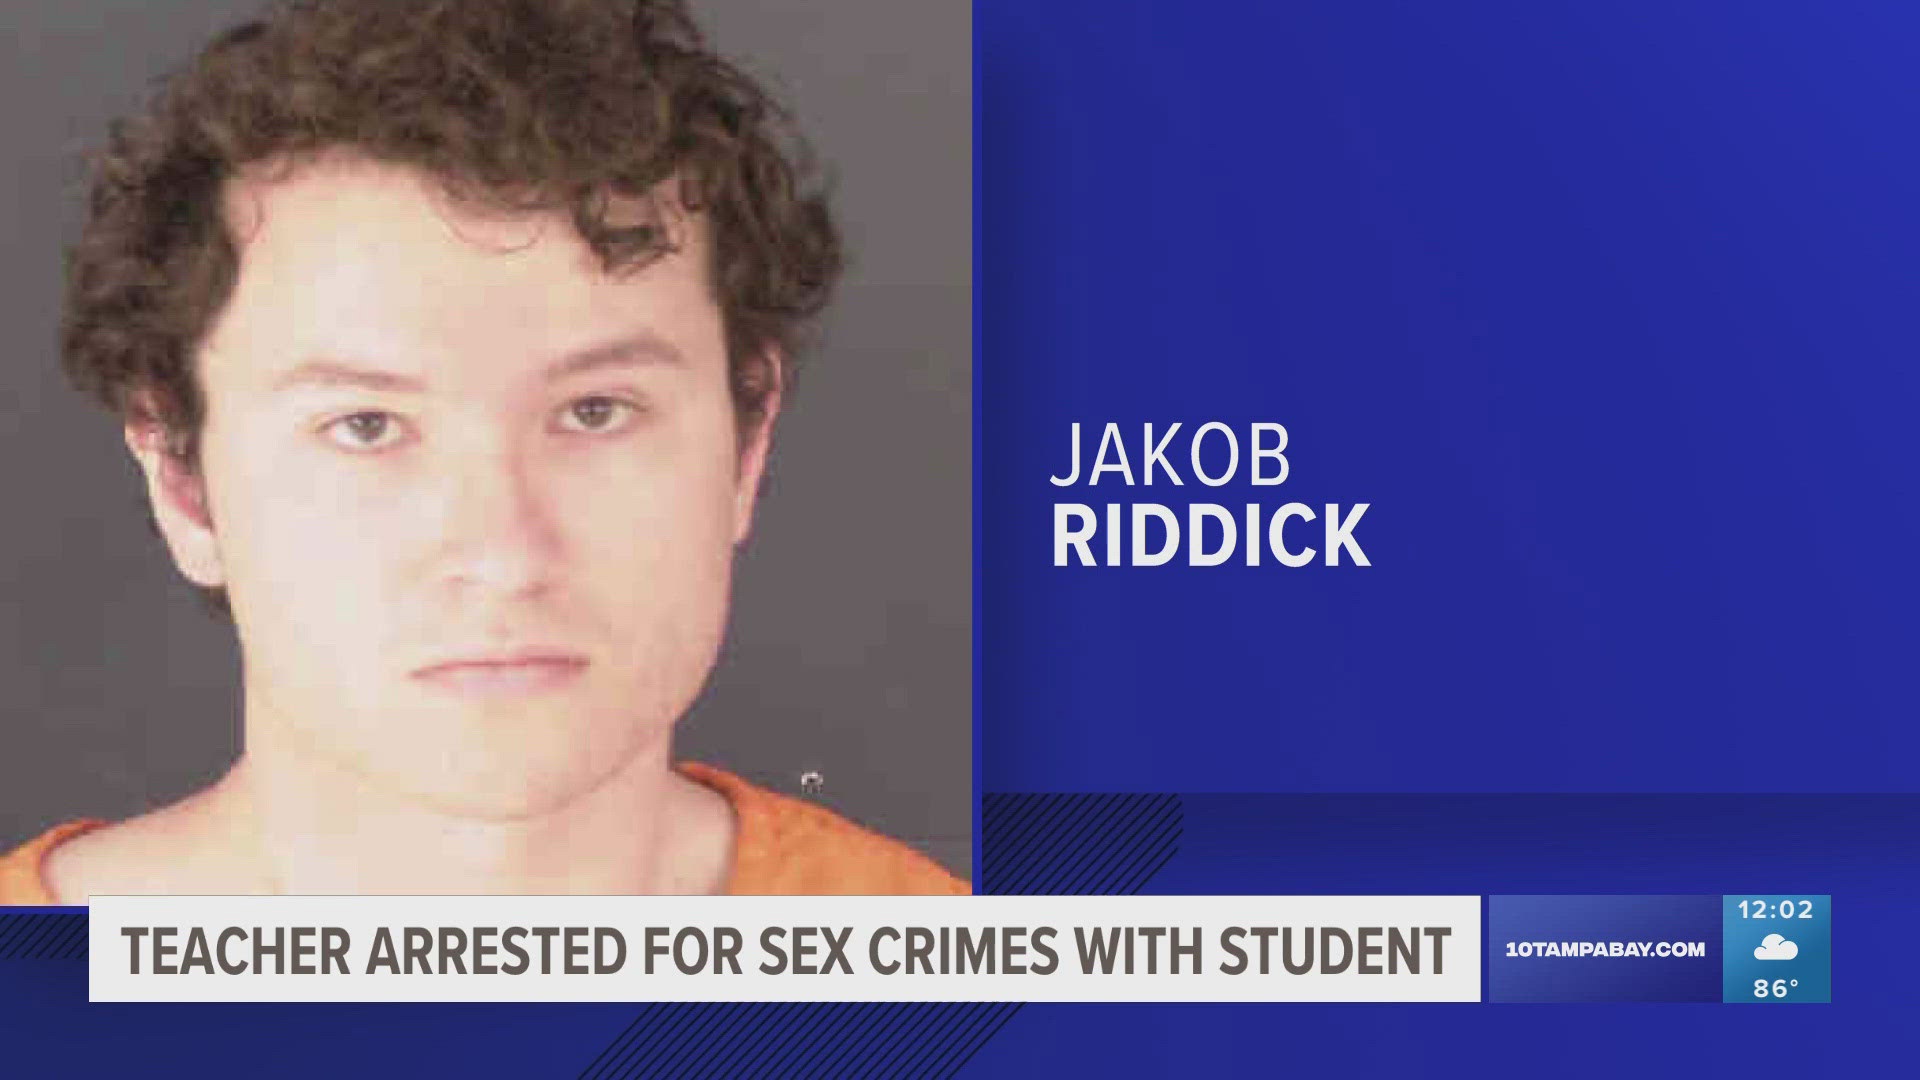 Jakob Riddick is being held with a bond.